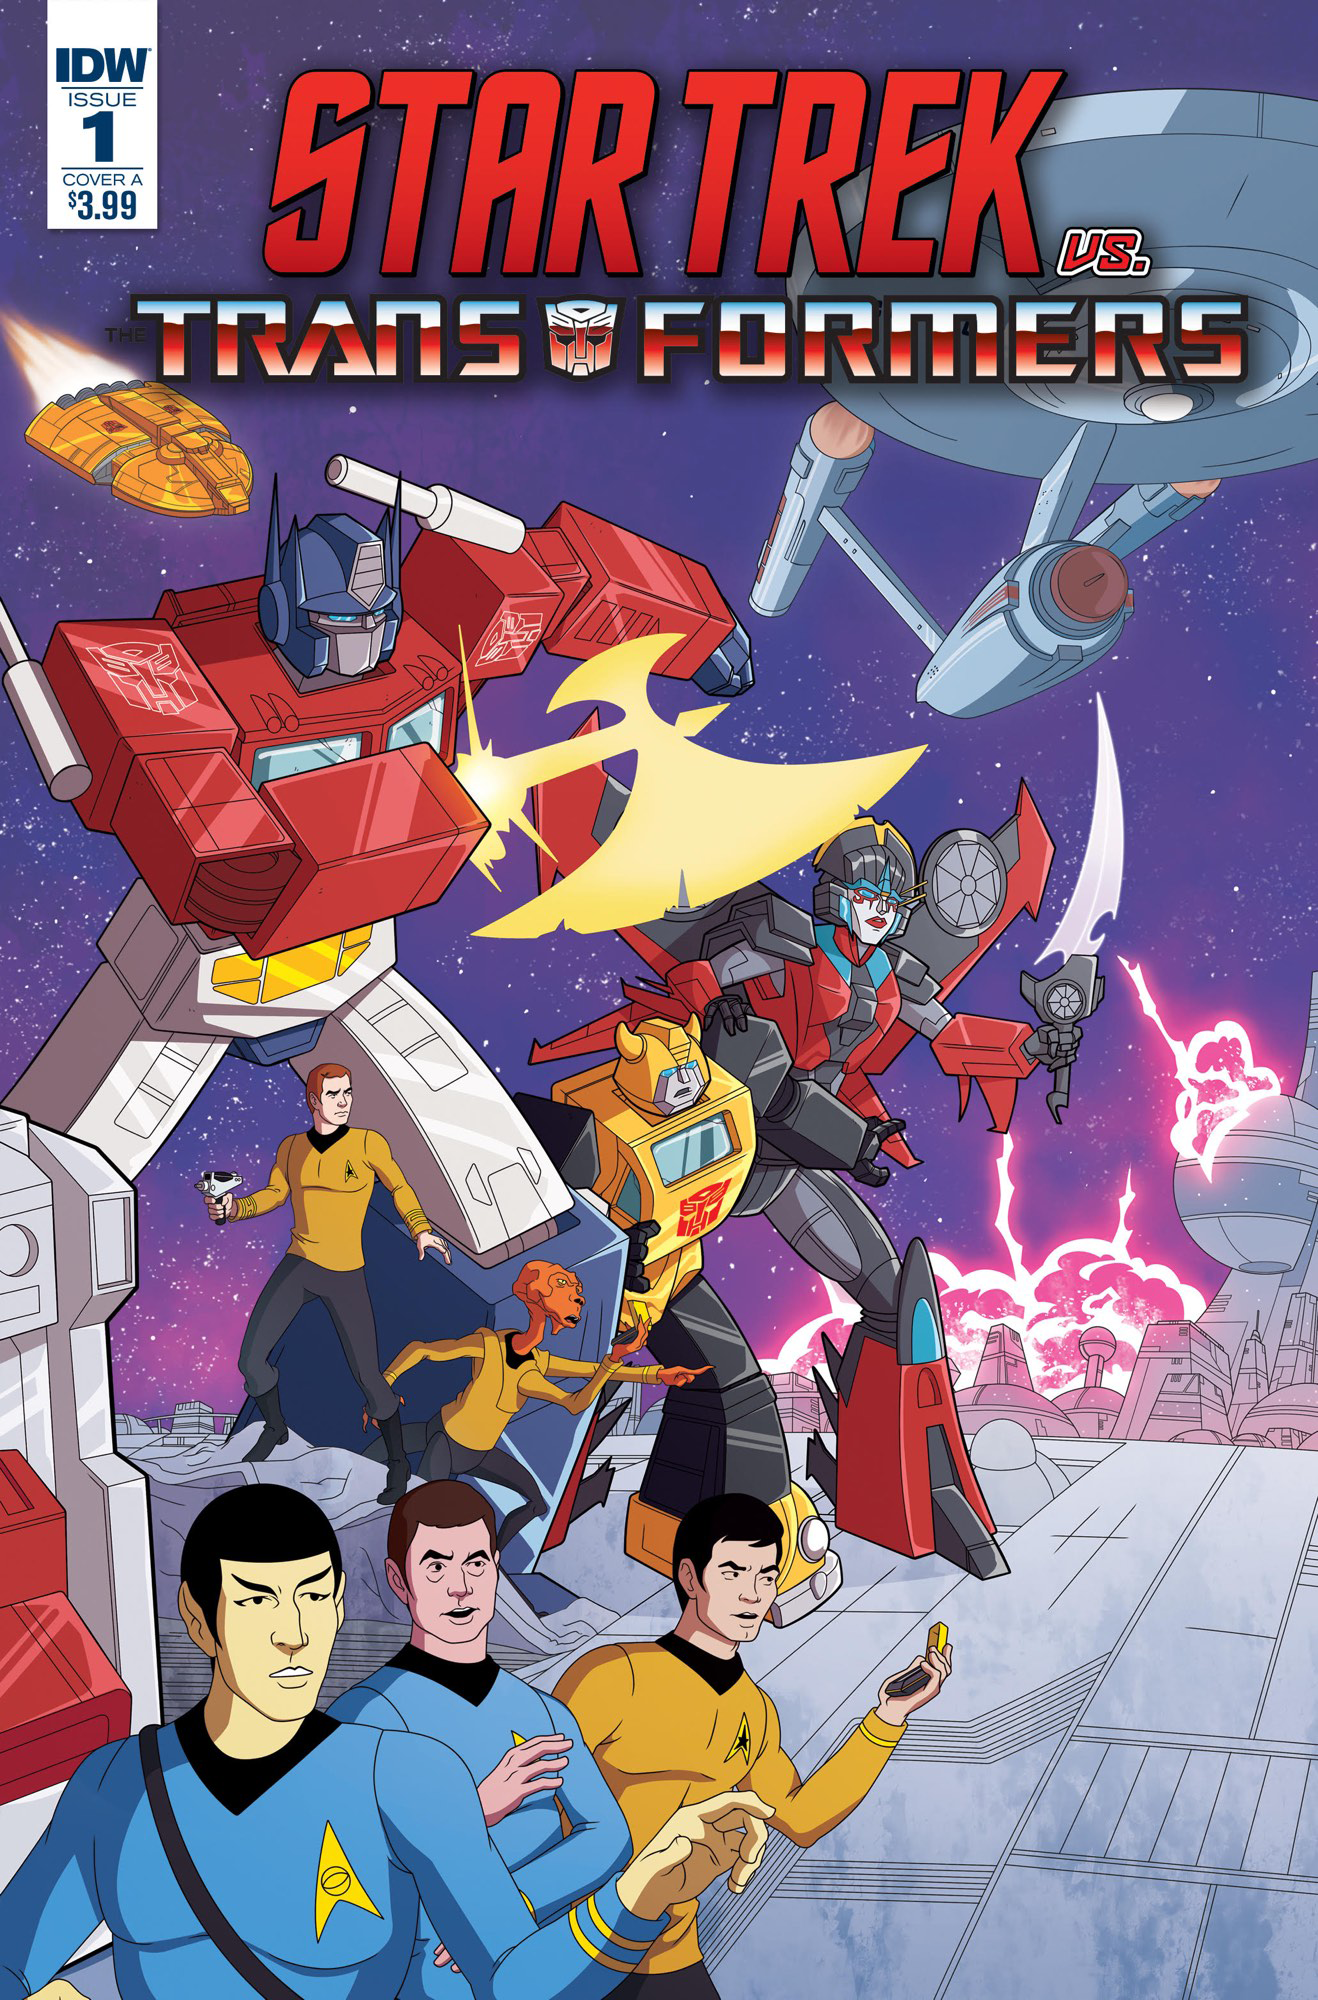 A New IDW Comic Is Mashing Up Star Trek And Transformers In The Most Glorious Way Possible